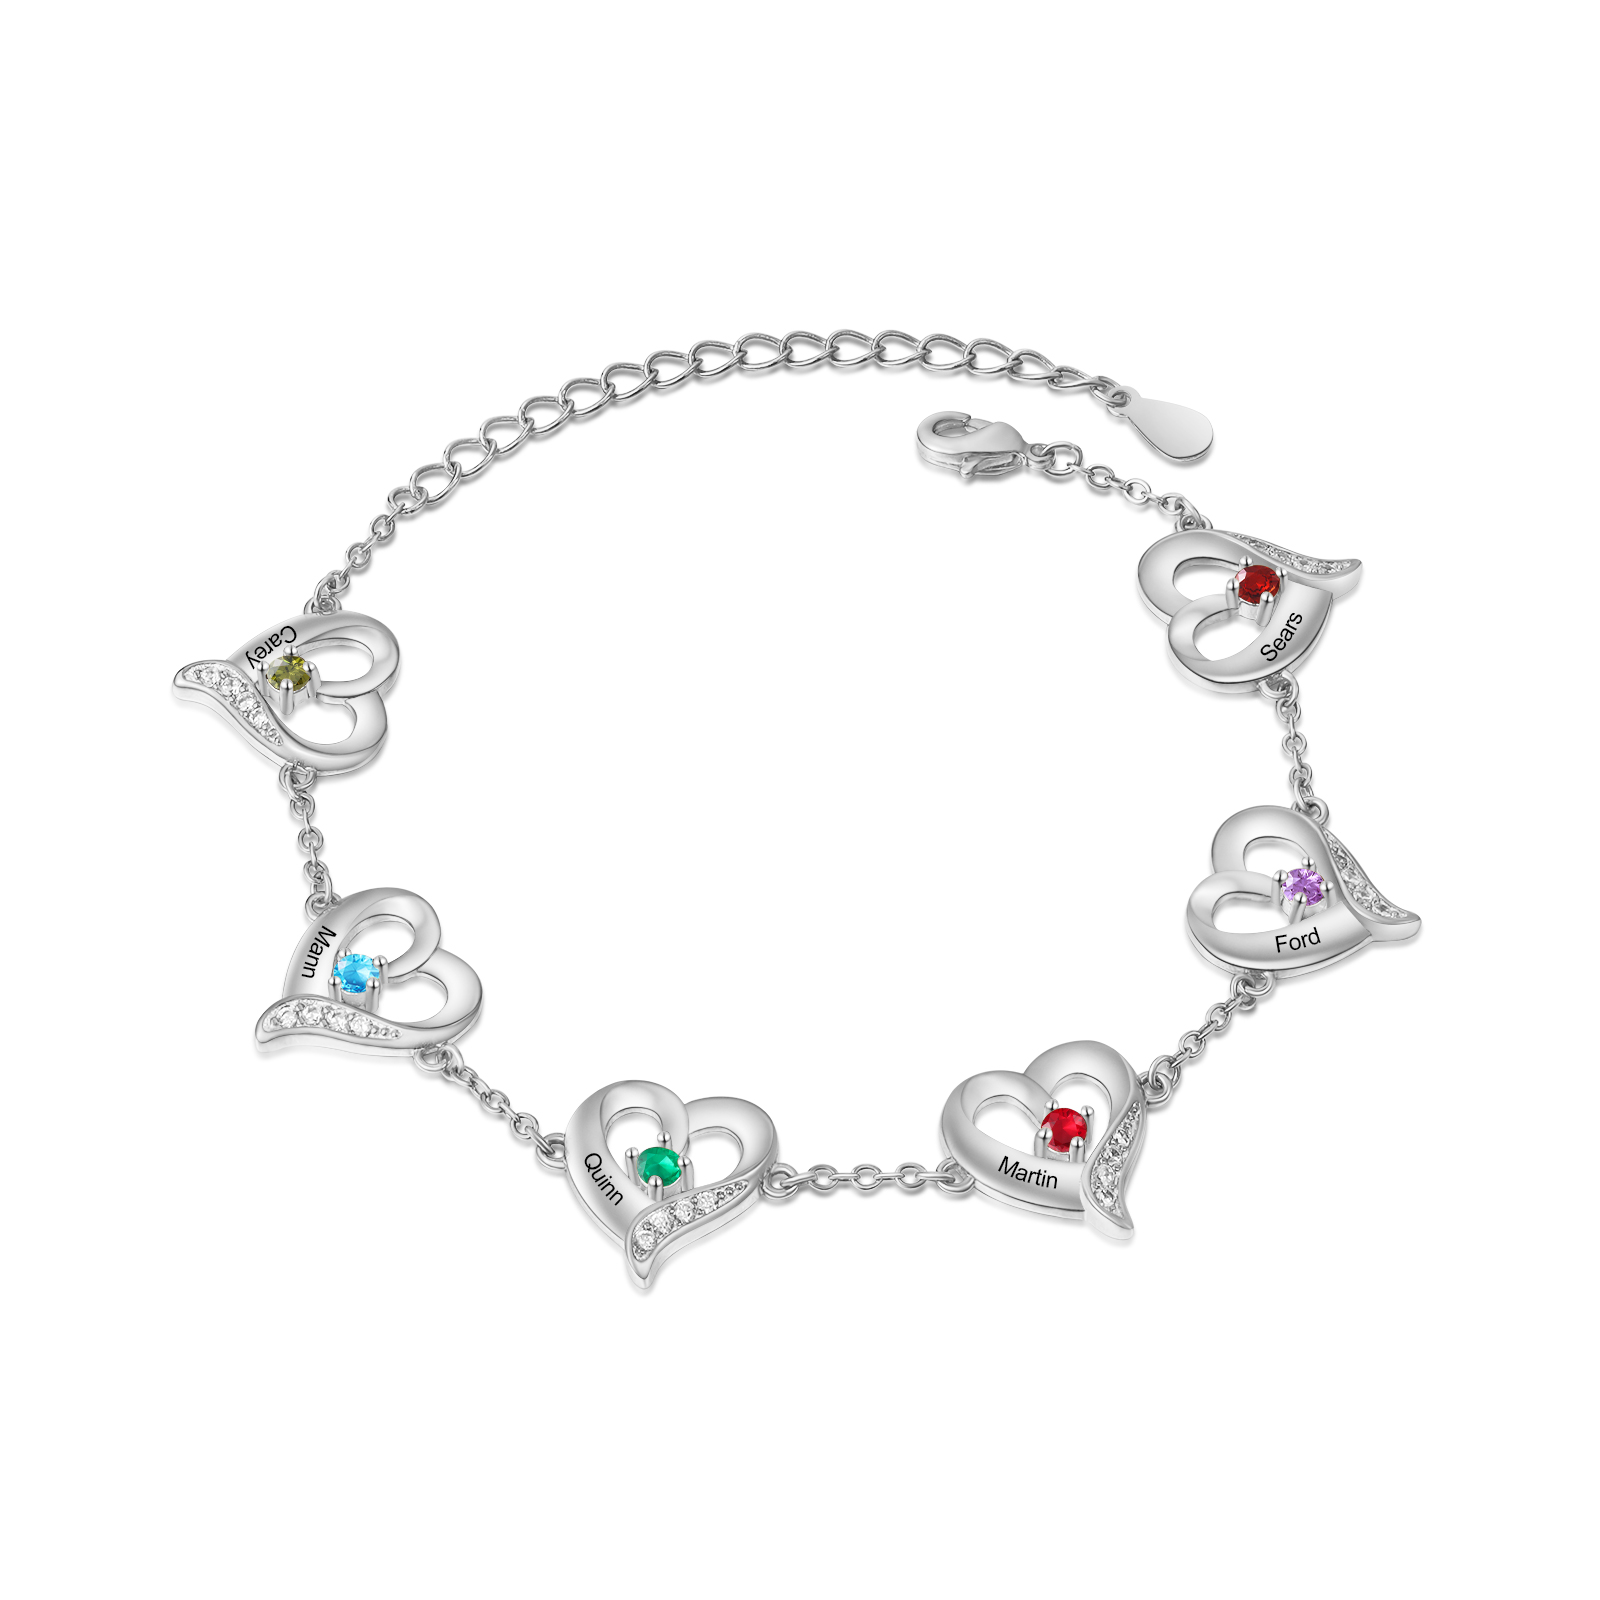 6 Names-Personalized Heart Bracelet With 6 Birthstones Engraved Names Bangle For Her